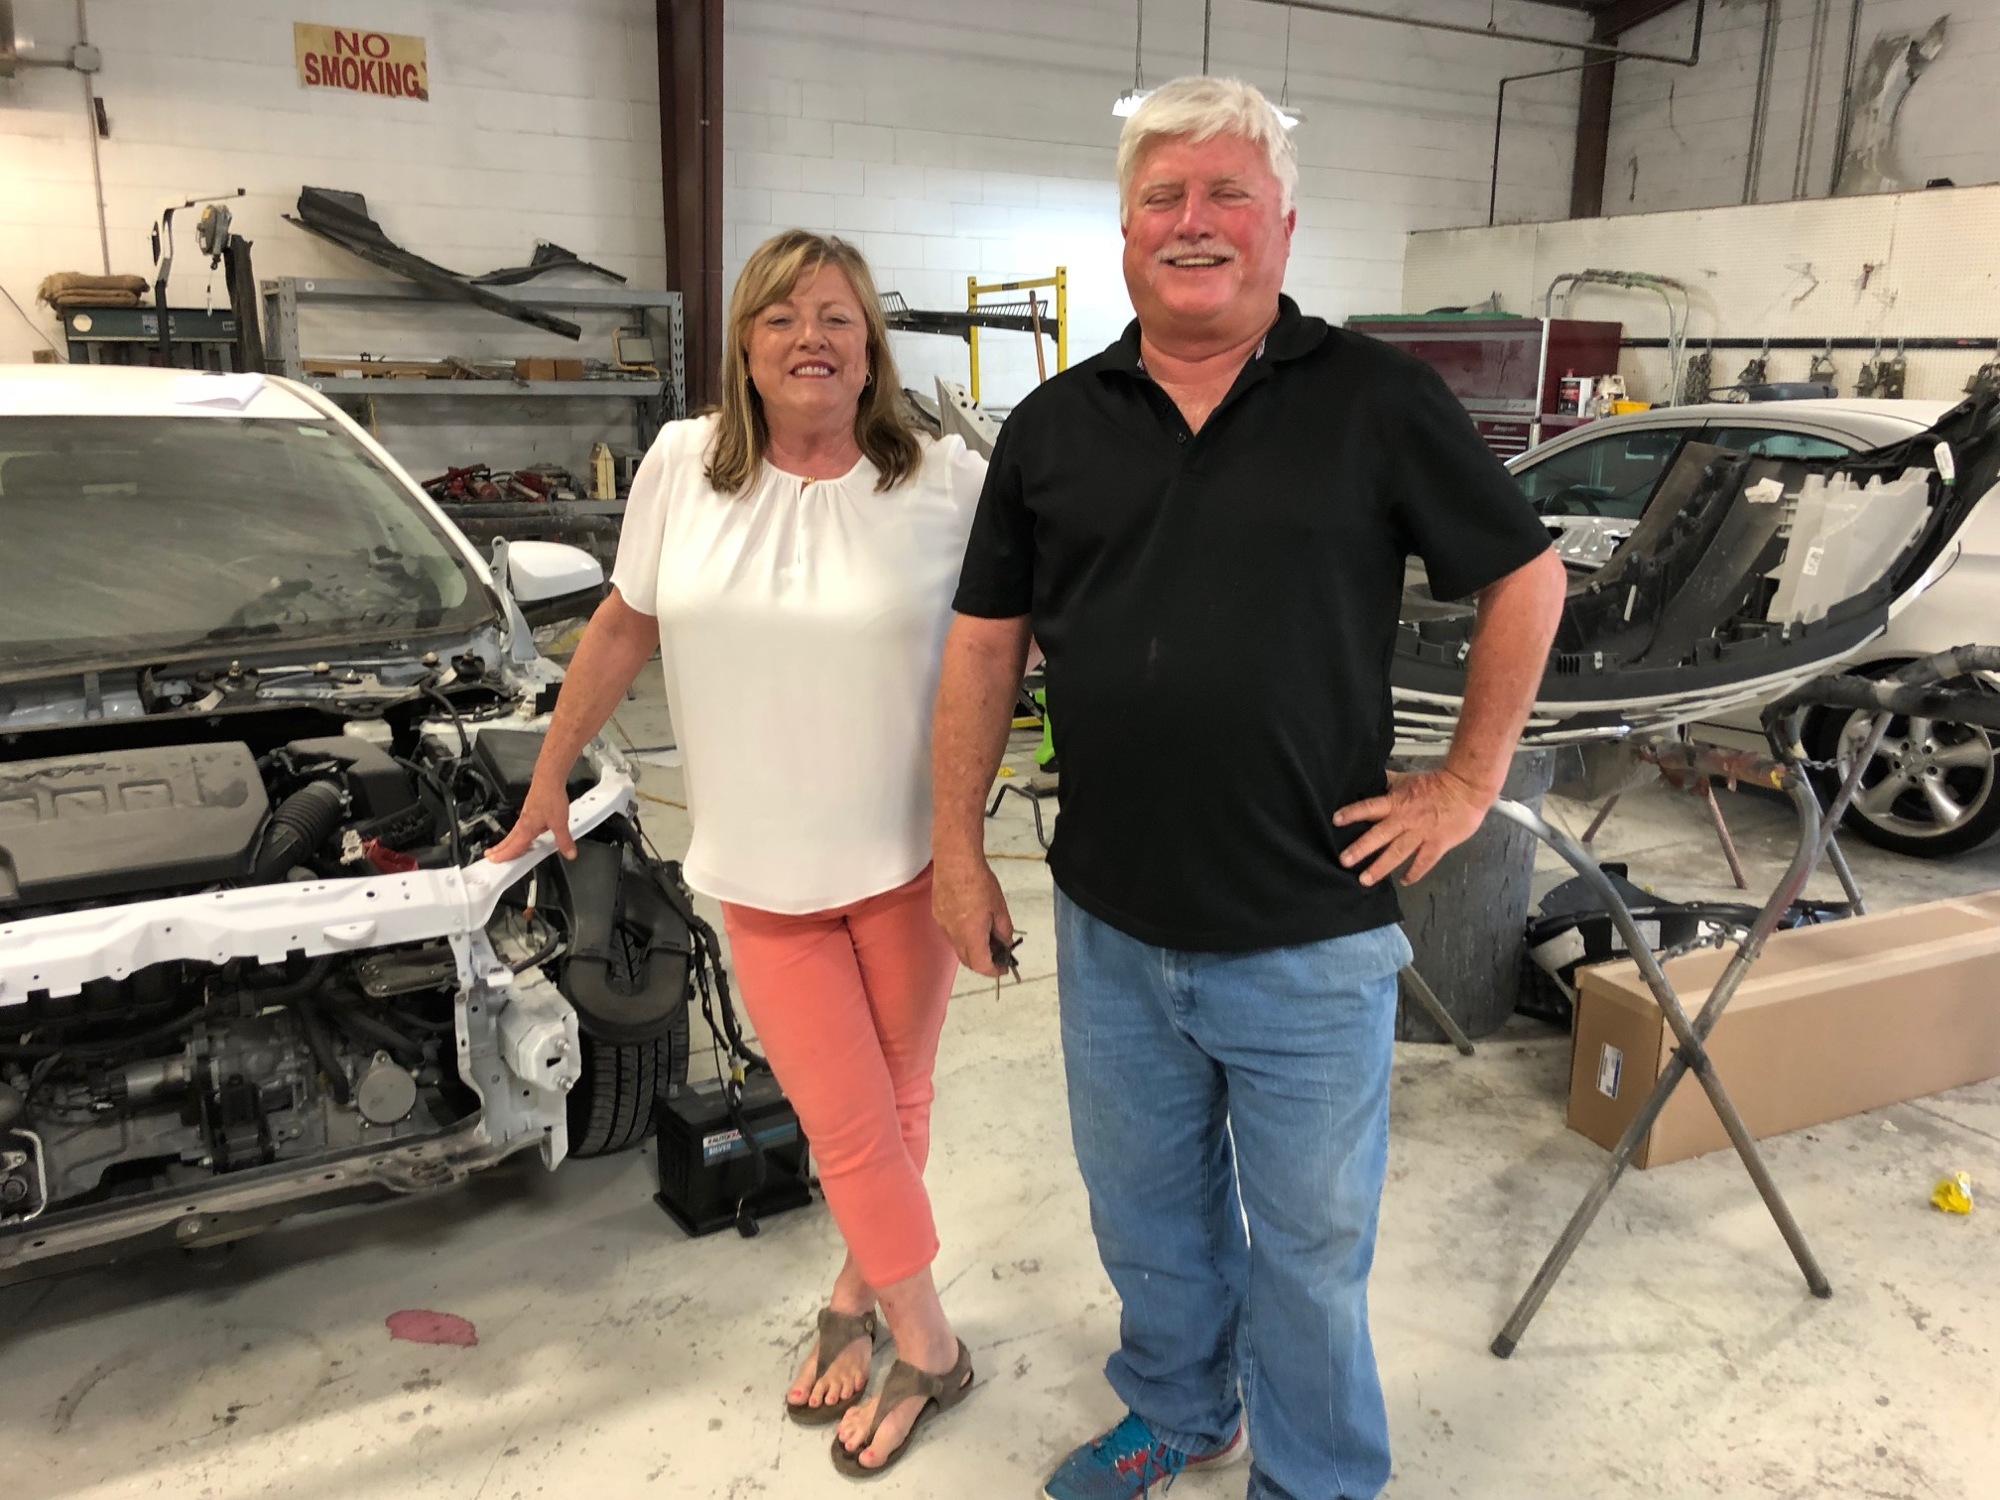 Sikes & Stowe Downtown Collision owner Bud Sikes and his younger sister, Laurie Mullarkey.